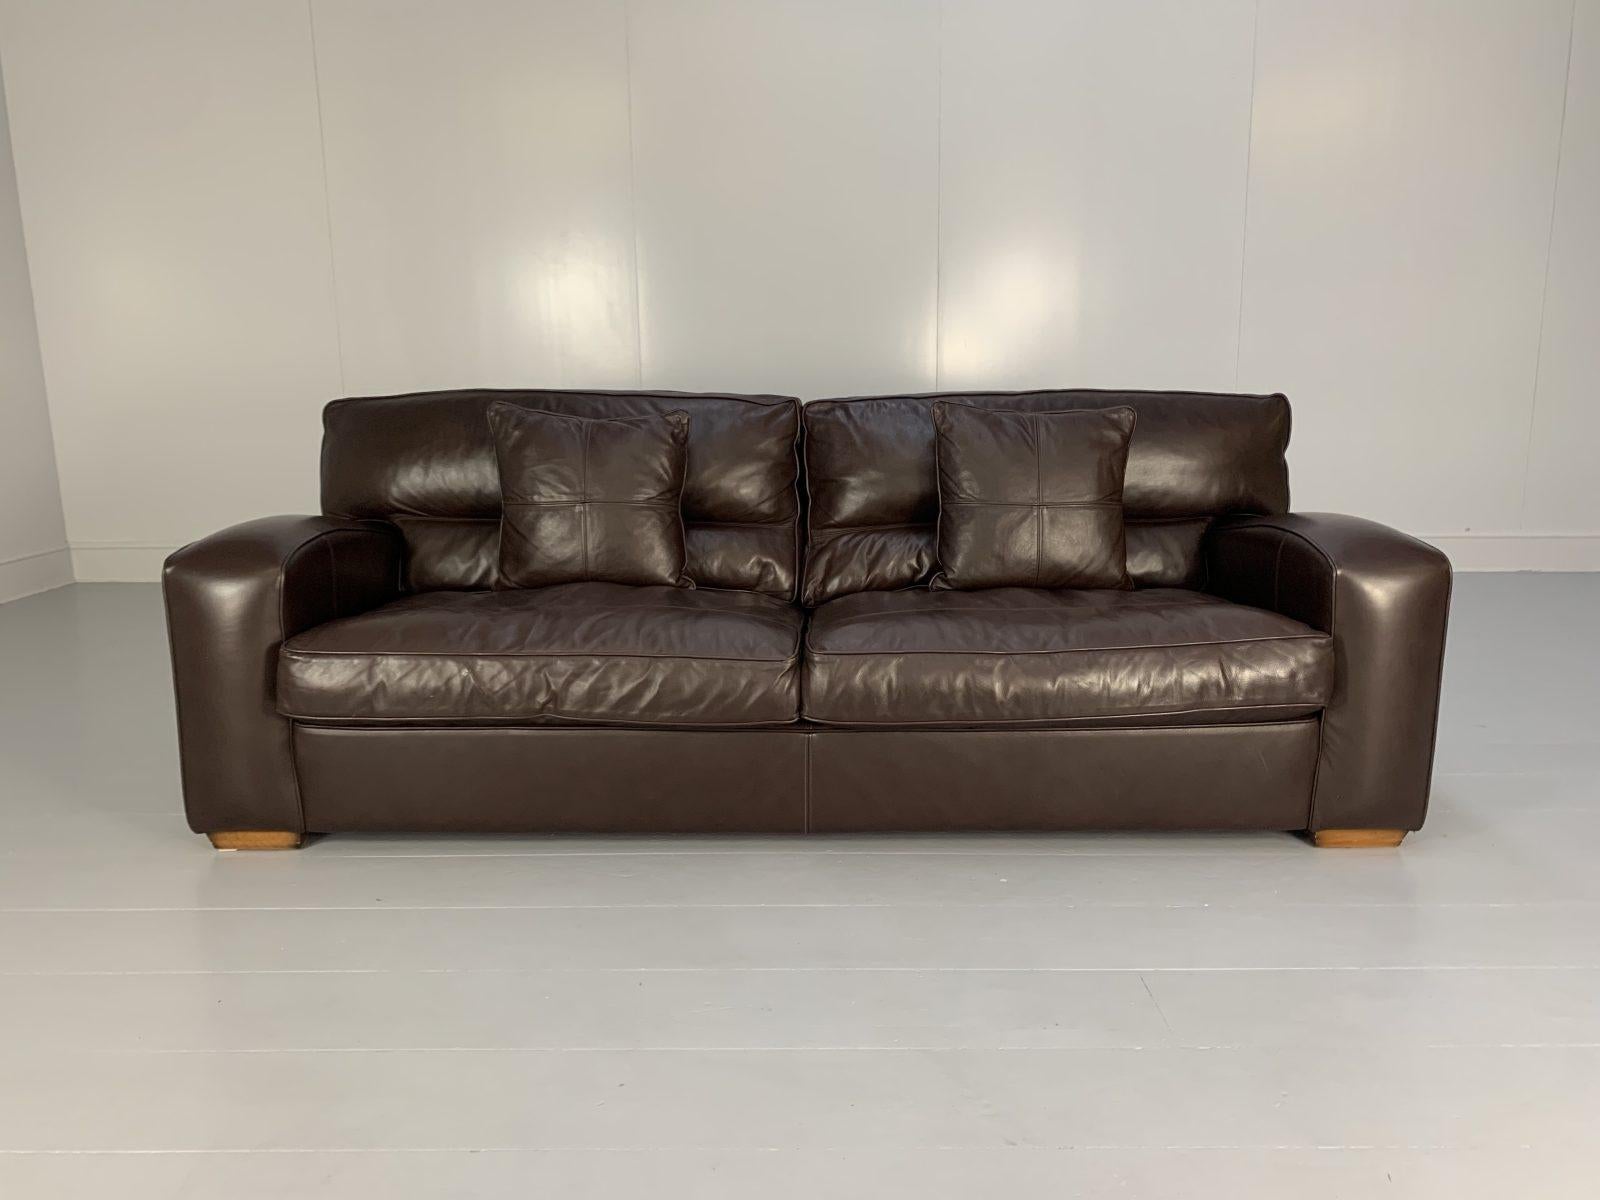 Hello Friends, and welcome to another unmissable offering from Lord Browns Furniture, the UK’s premier resource for fine Sofas and Chairs.

On offer on this occasion is perhaps the last leather sofa you ever need buy, it being an undeniably